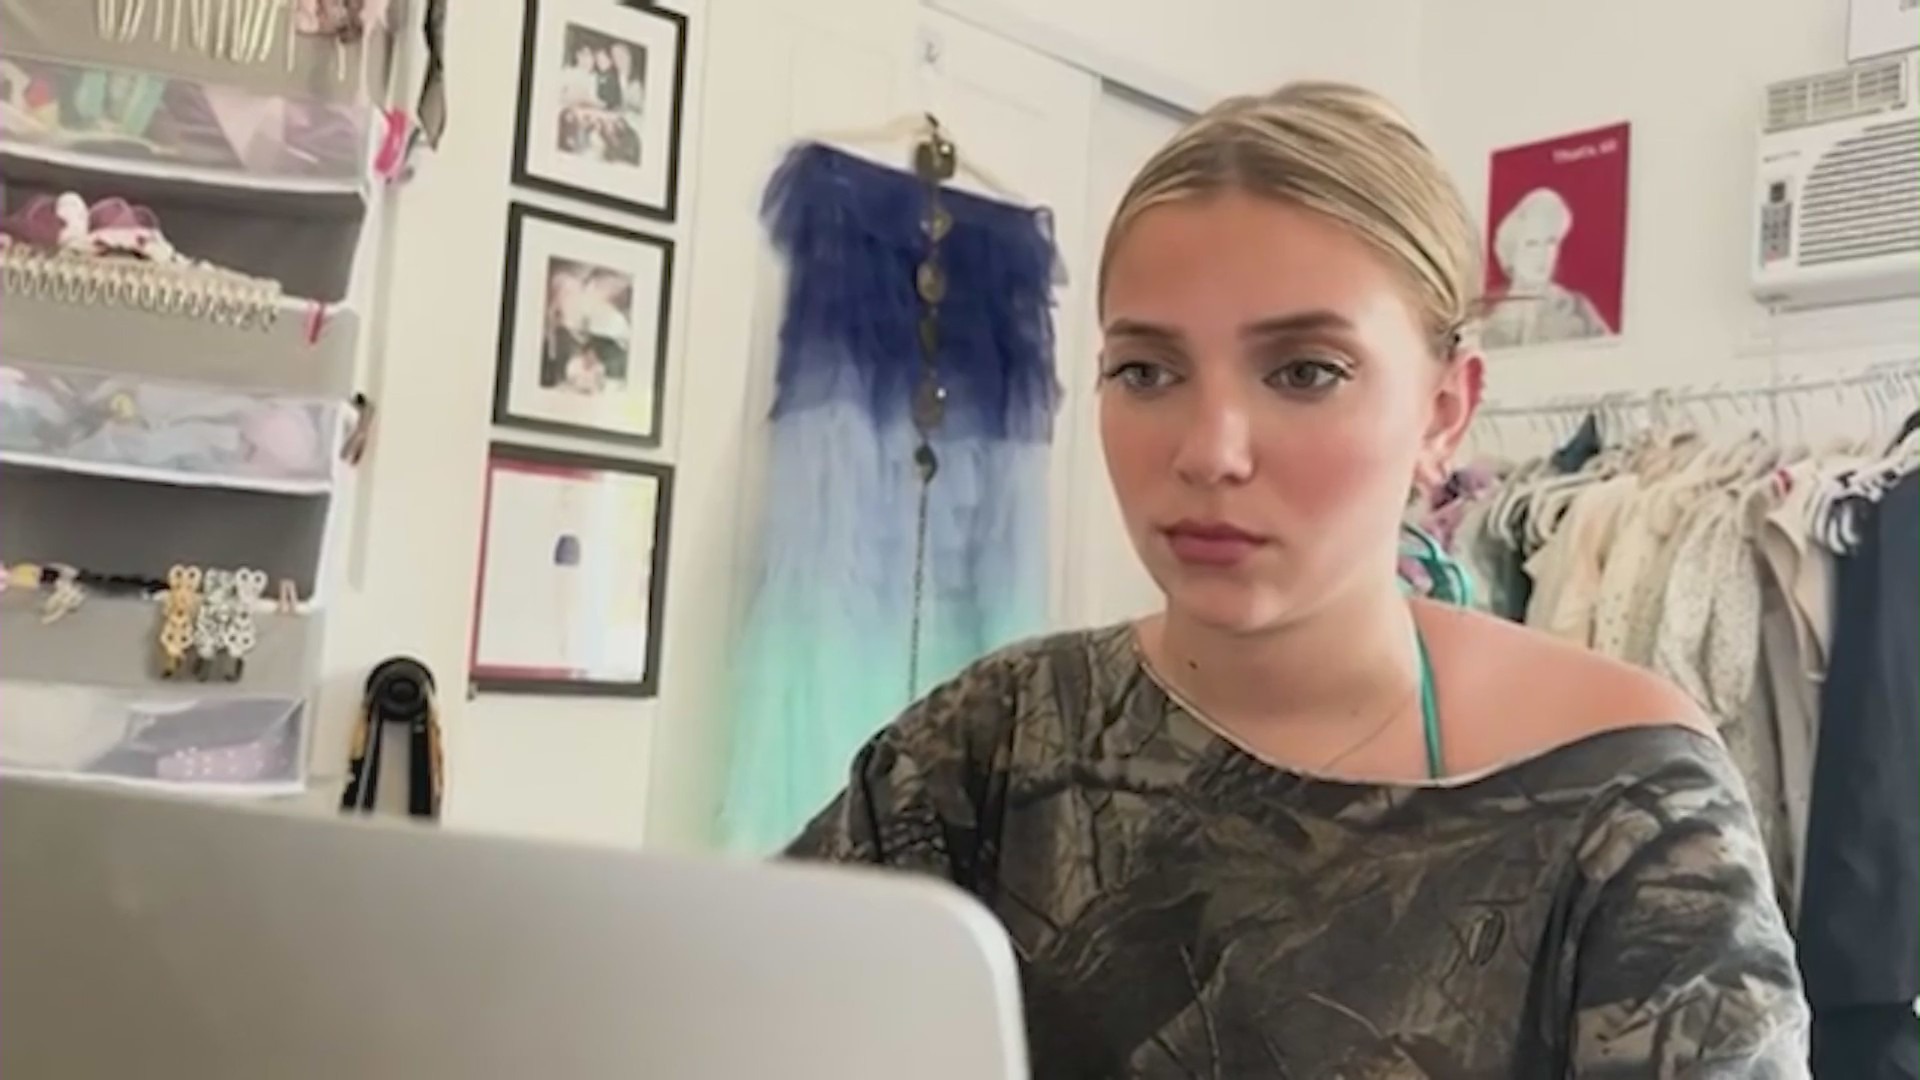 Lexy Silverstein, a 20-year-old student at FIDM, is speaking out against her school’s collaboration with Shein, saying the move marks the antithesis to much-needed sustainability in the fashion industry. (KTLA)